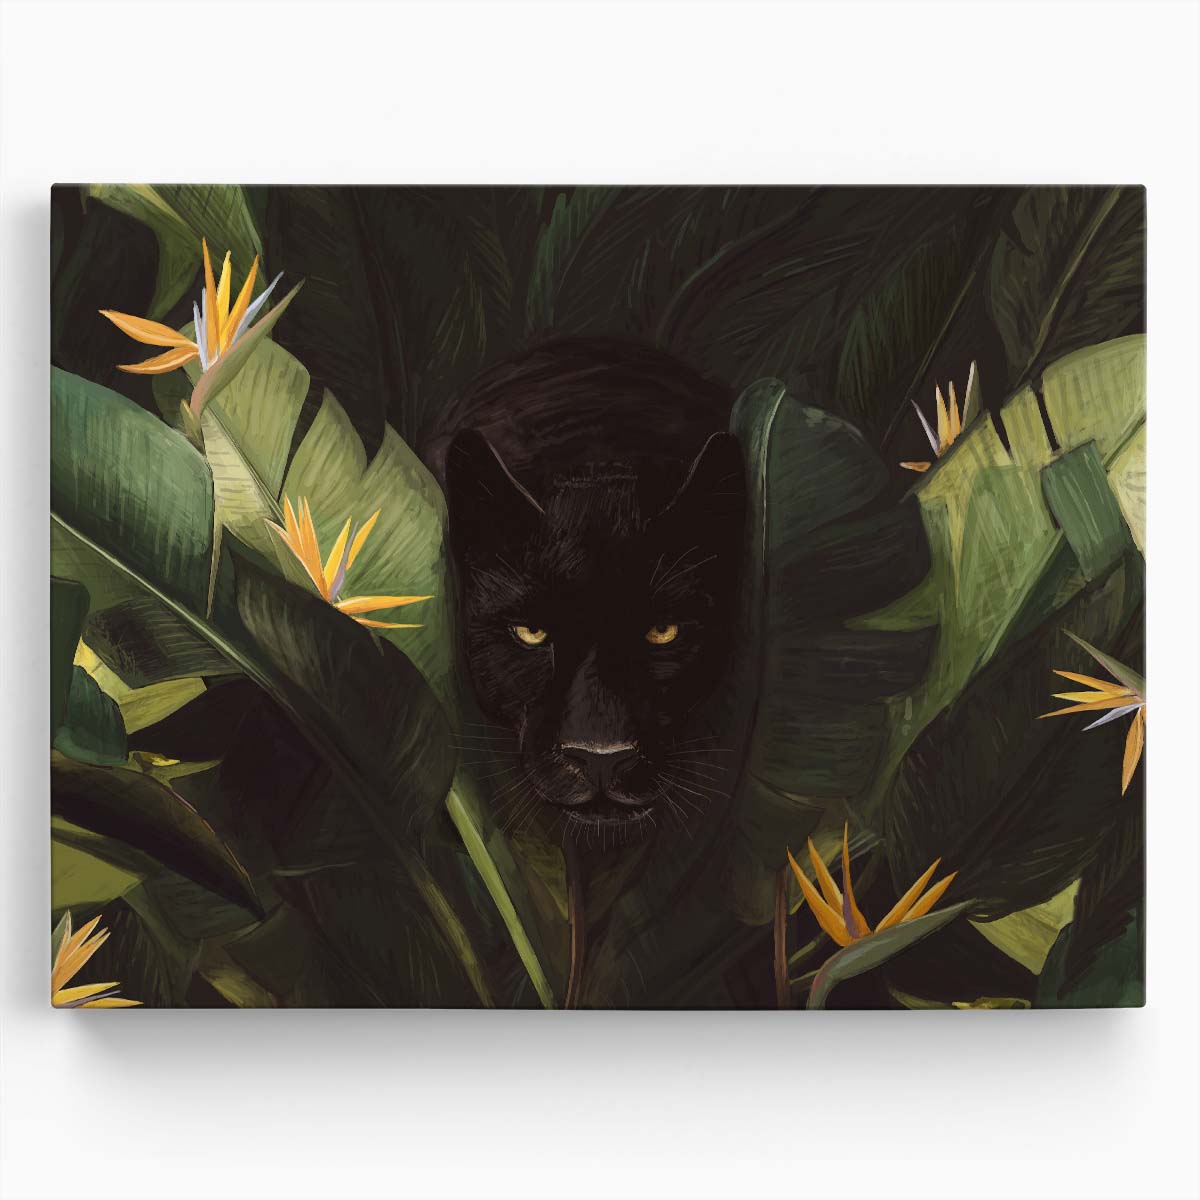 Black Panther Close-Up Painting by Florent Bodart Wall Art by Luxuriance Designs. Made in USA.